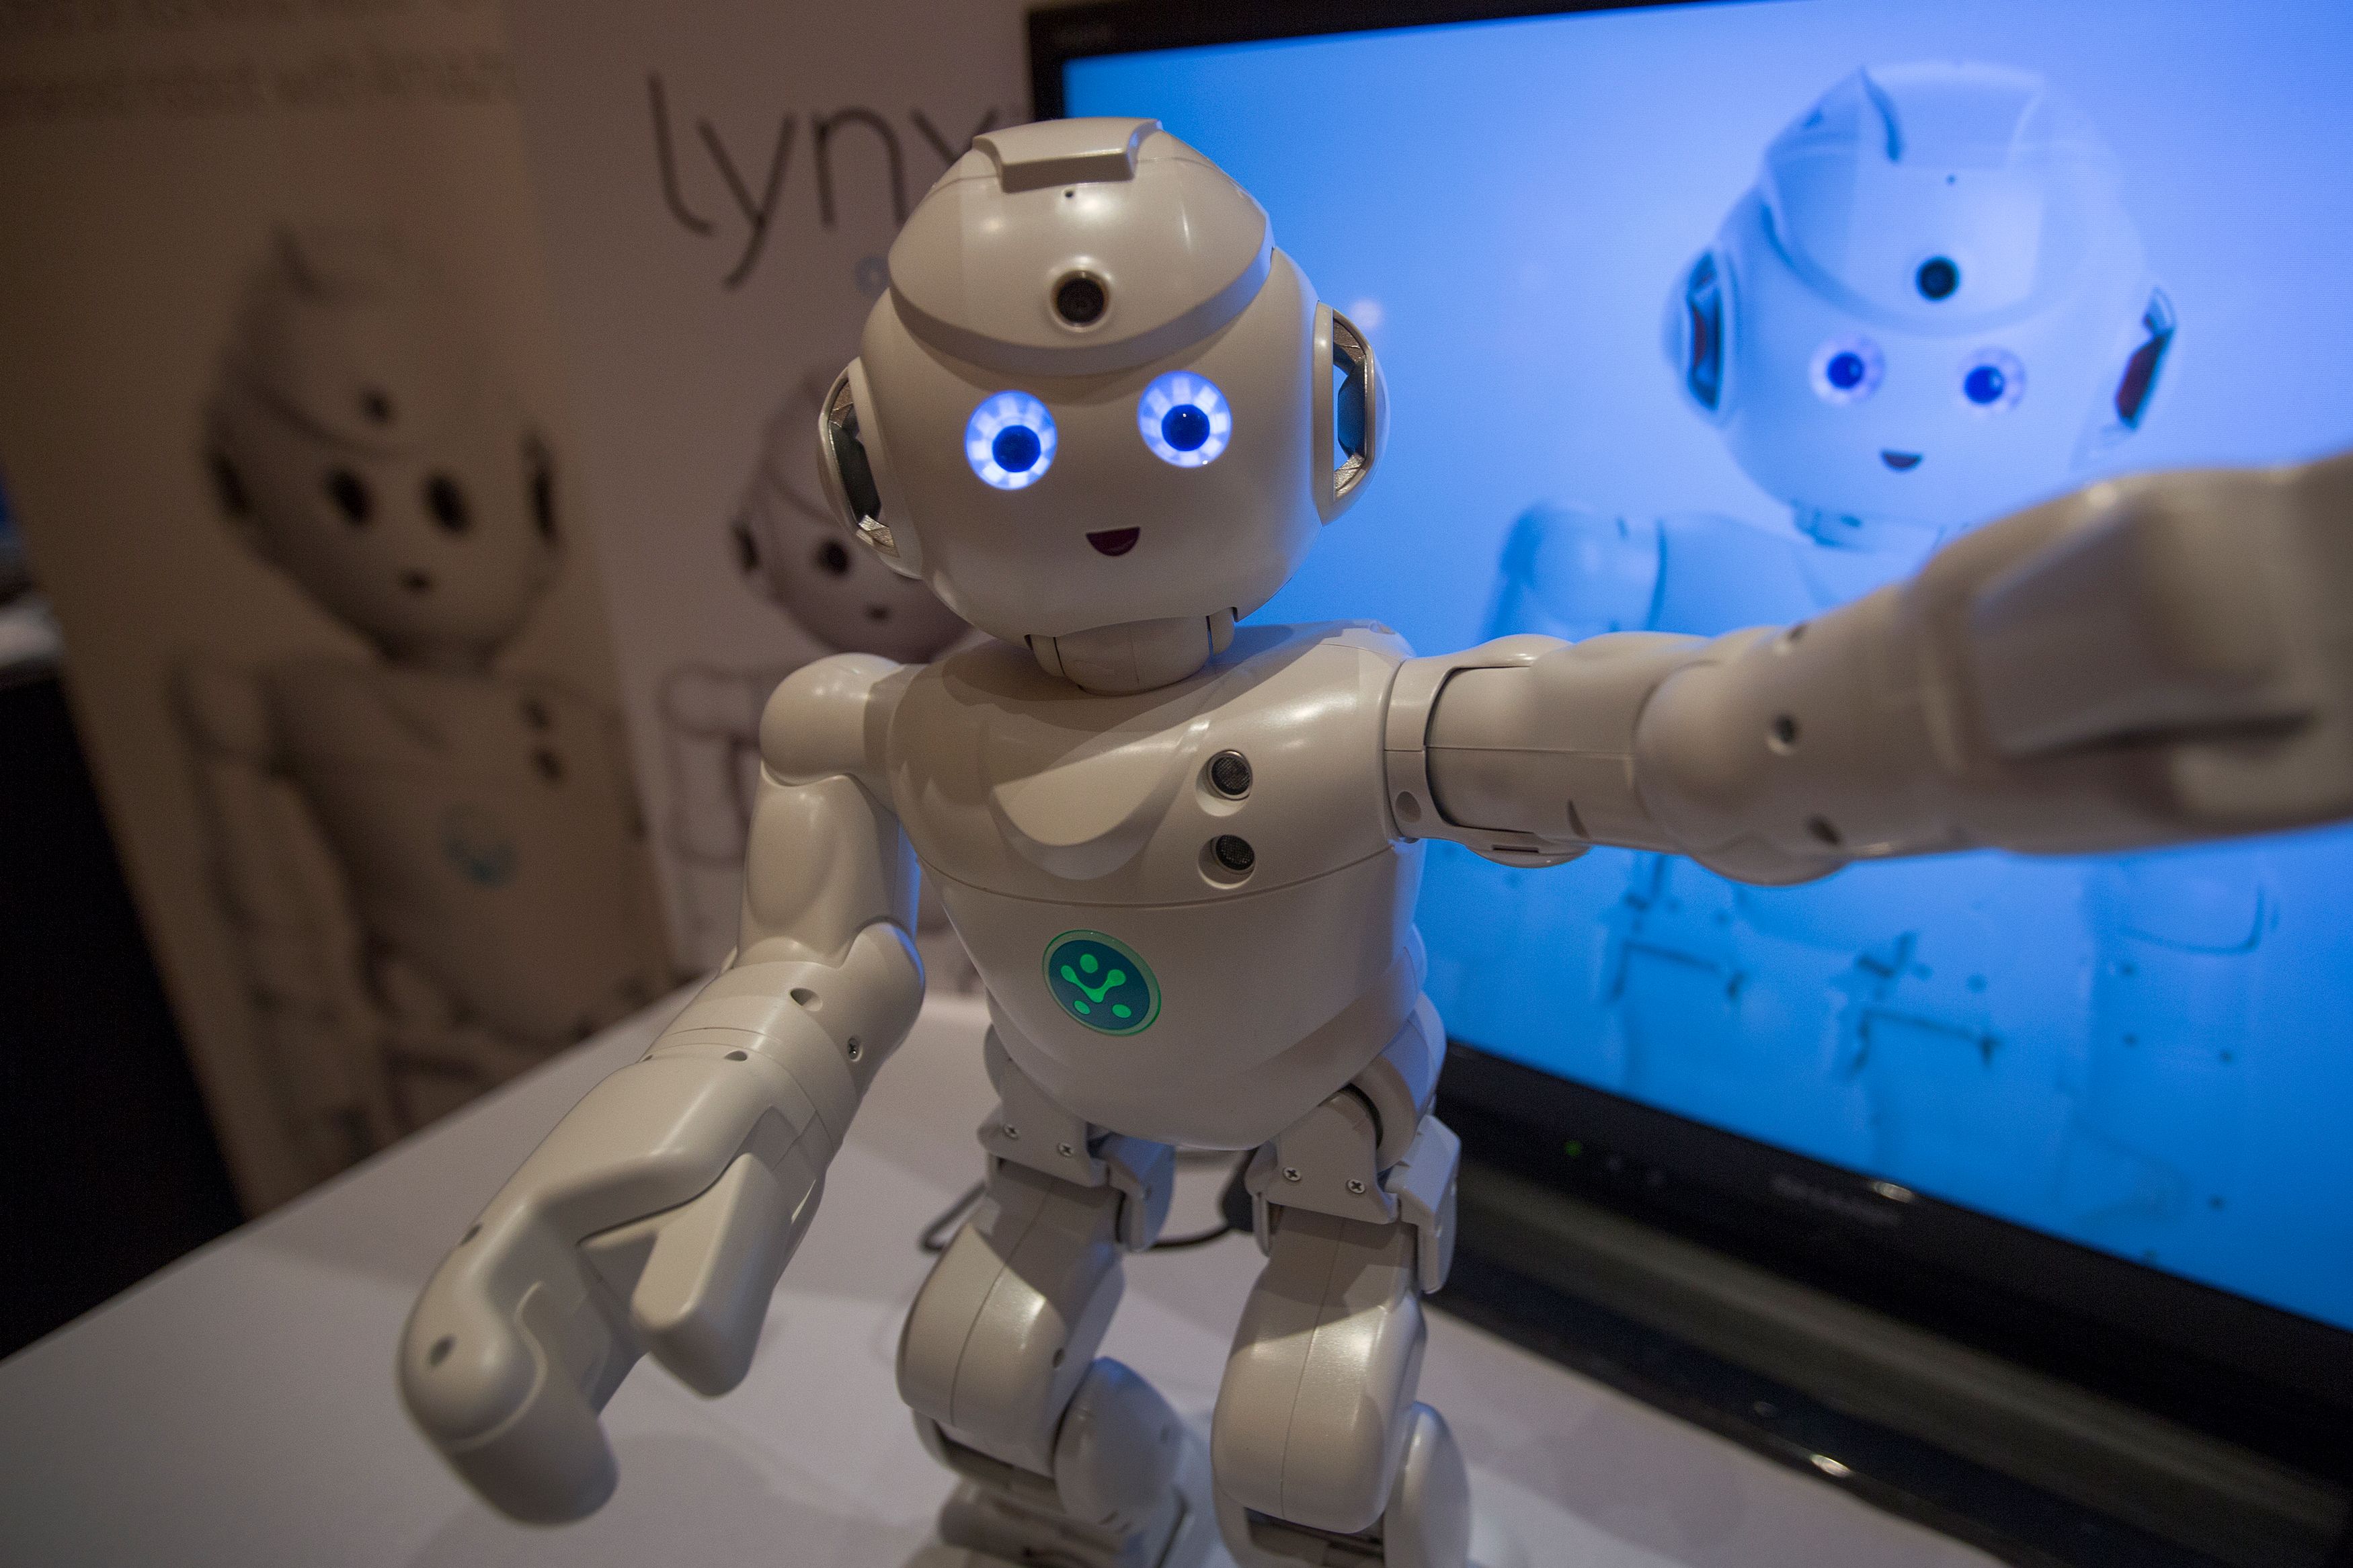 A Lynx robot toy by UBTECH Robotics dances at ShowStoppers during the 2017 Consumer Electronic Show (CES) in Las Vegas, Nevada on January 5, 2017. (DAVID MCNEW&mdash;AFP/Getty Images)